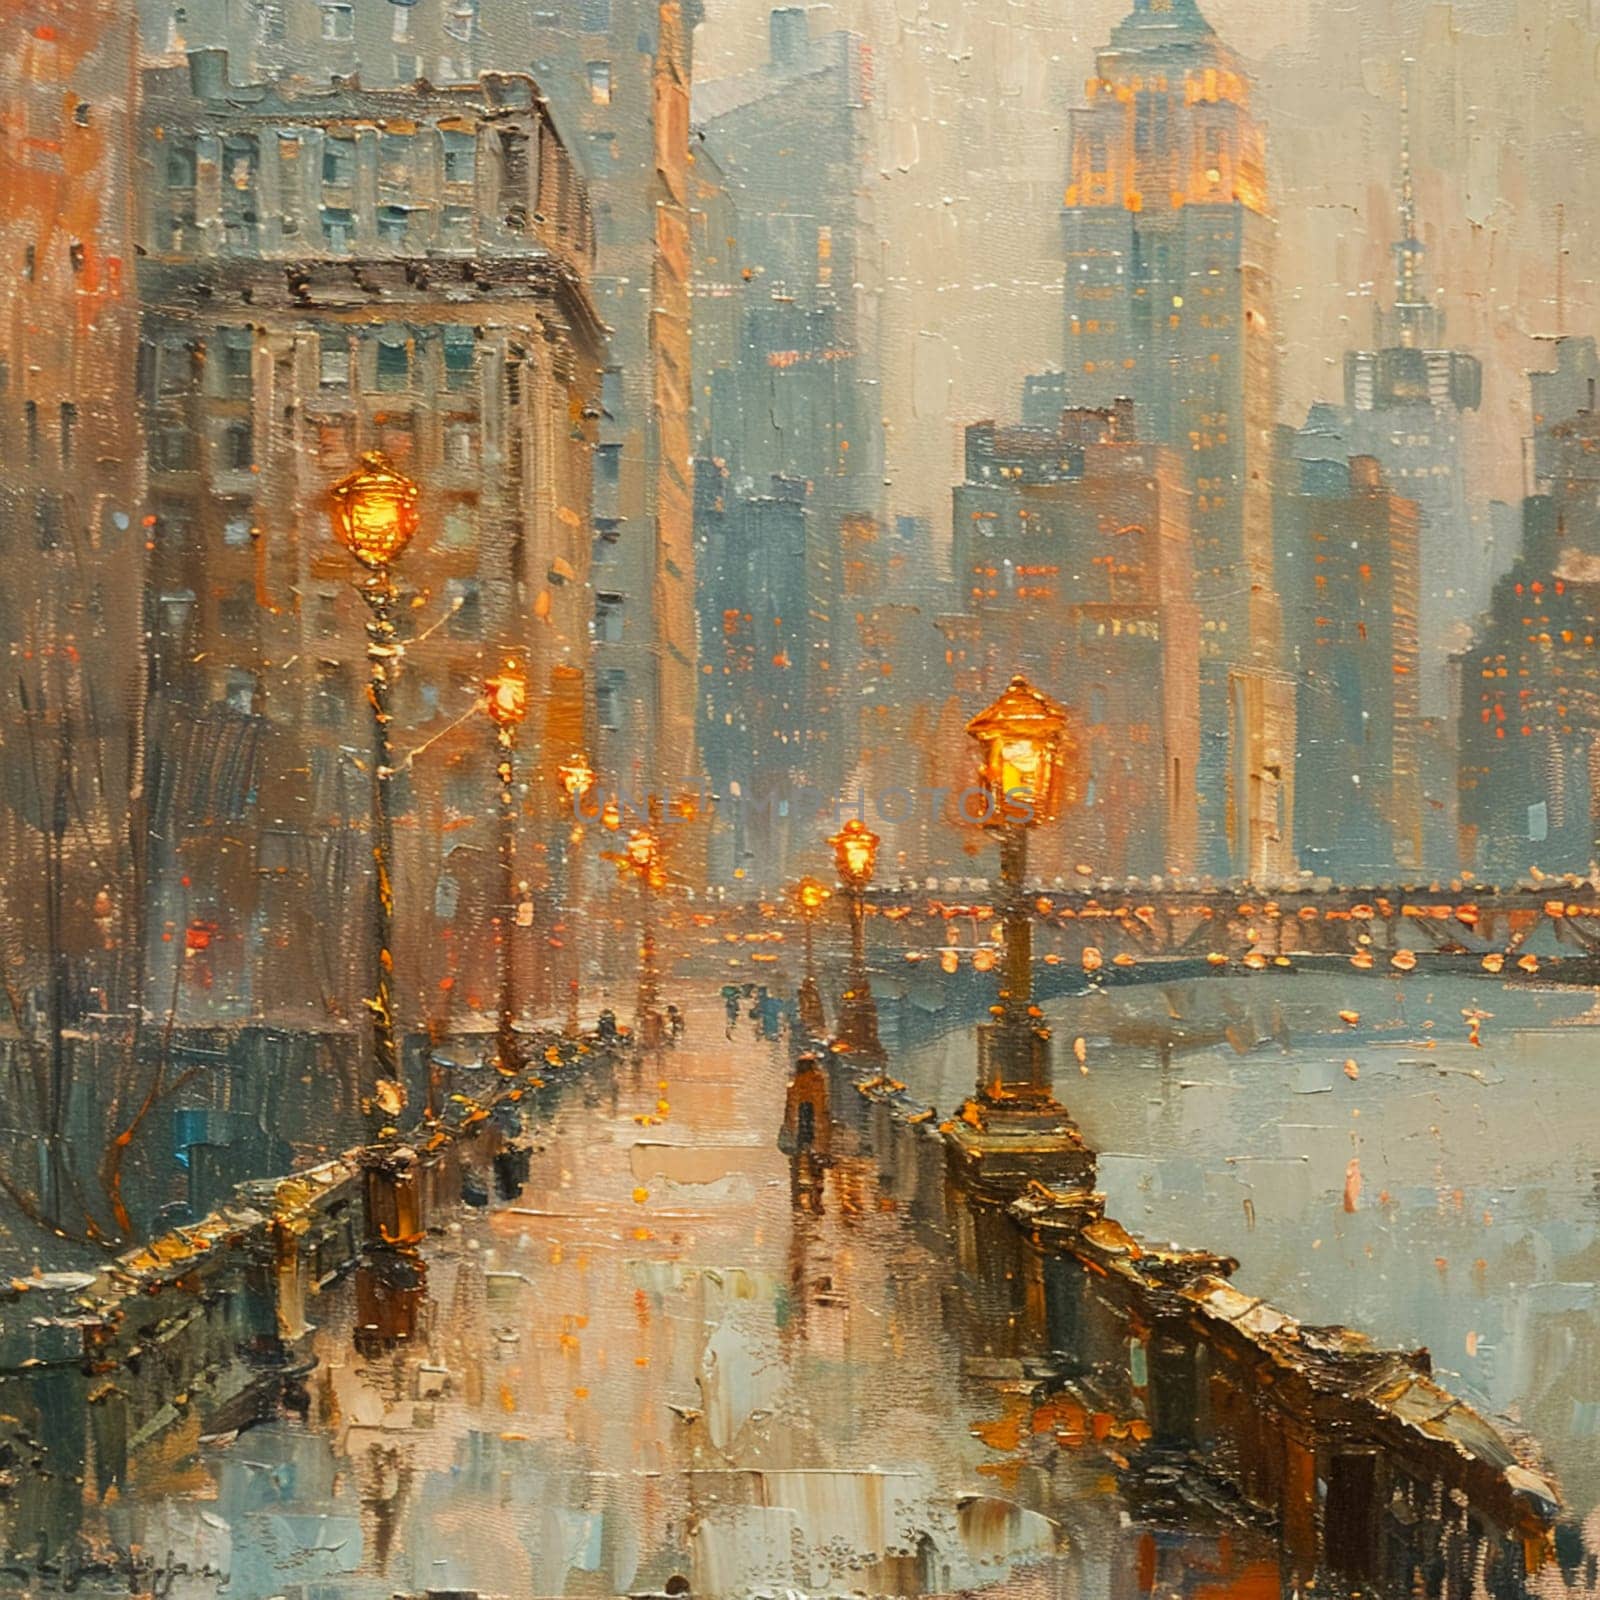 Bridge view in the city painted with a soft-focus background and detailed architectural foreground.